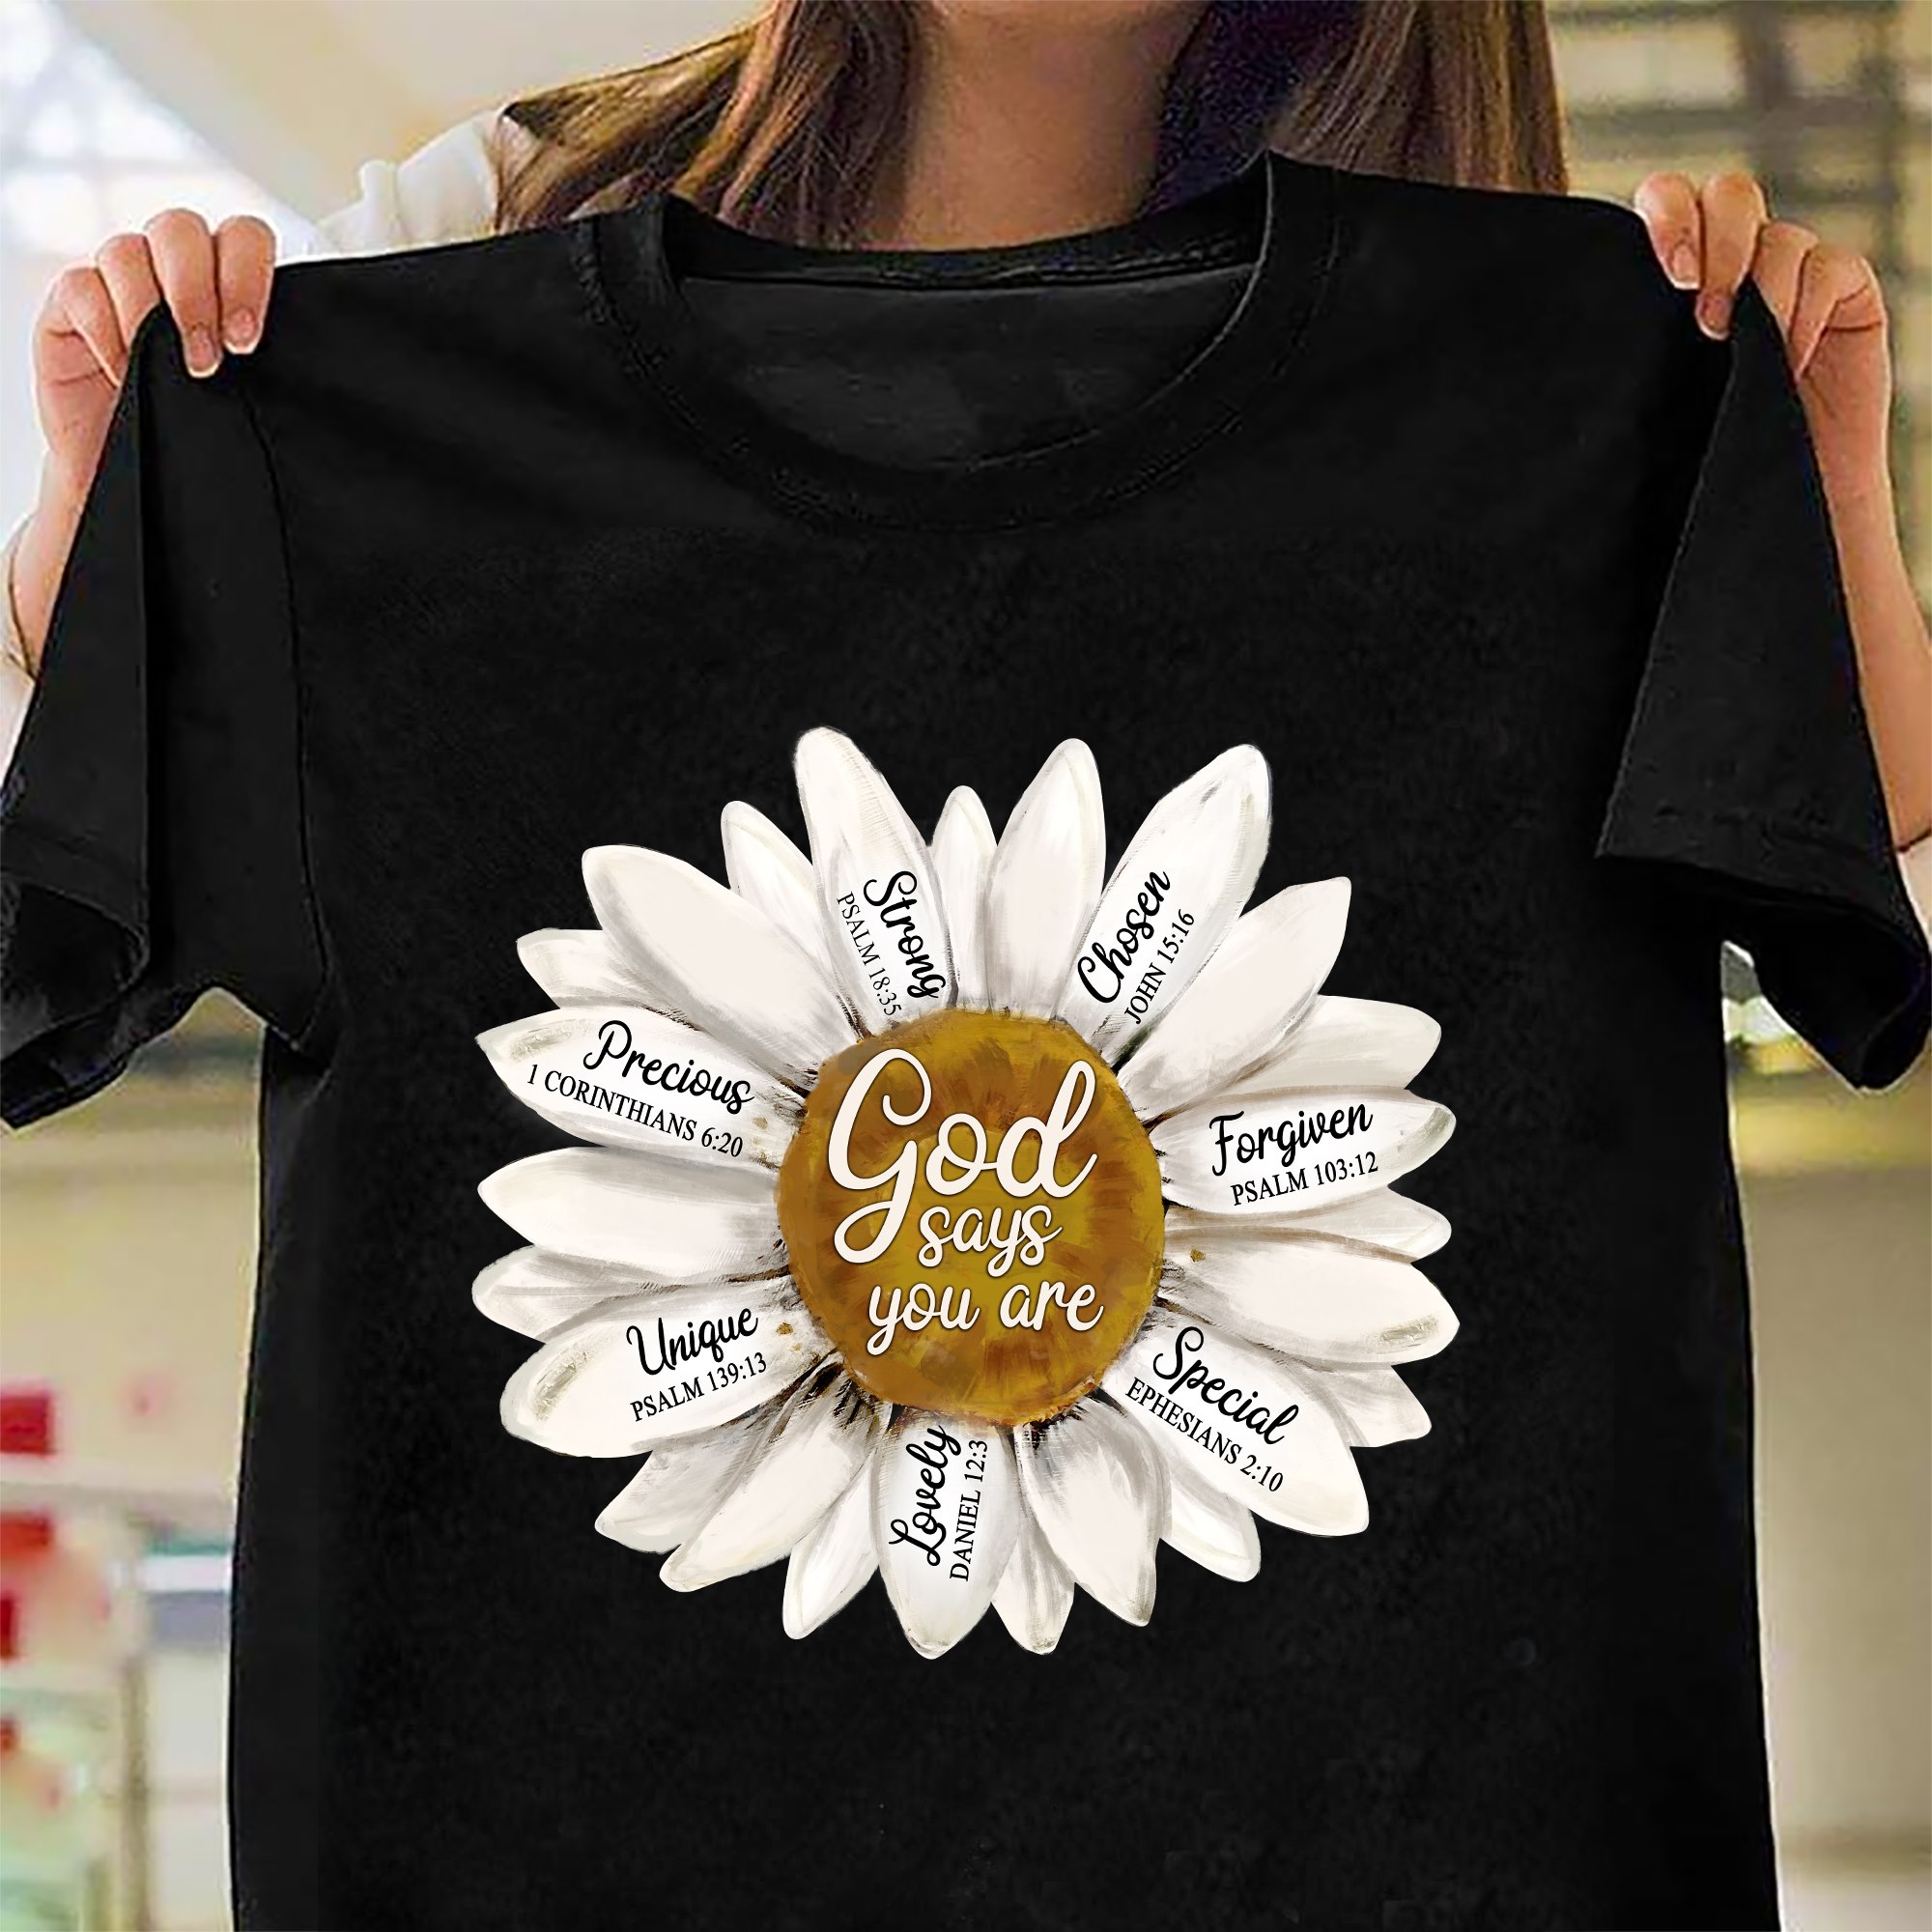 God says you are precious, strong, forgiven, lovely, special - Sunflower god